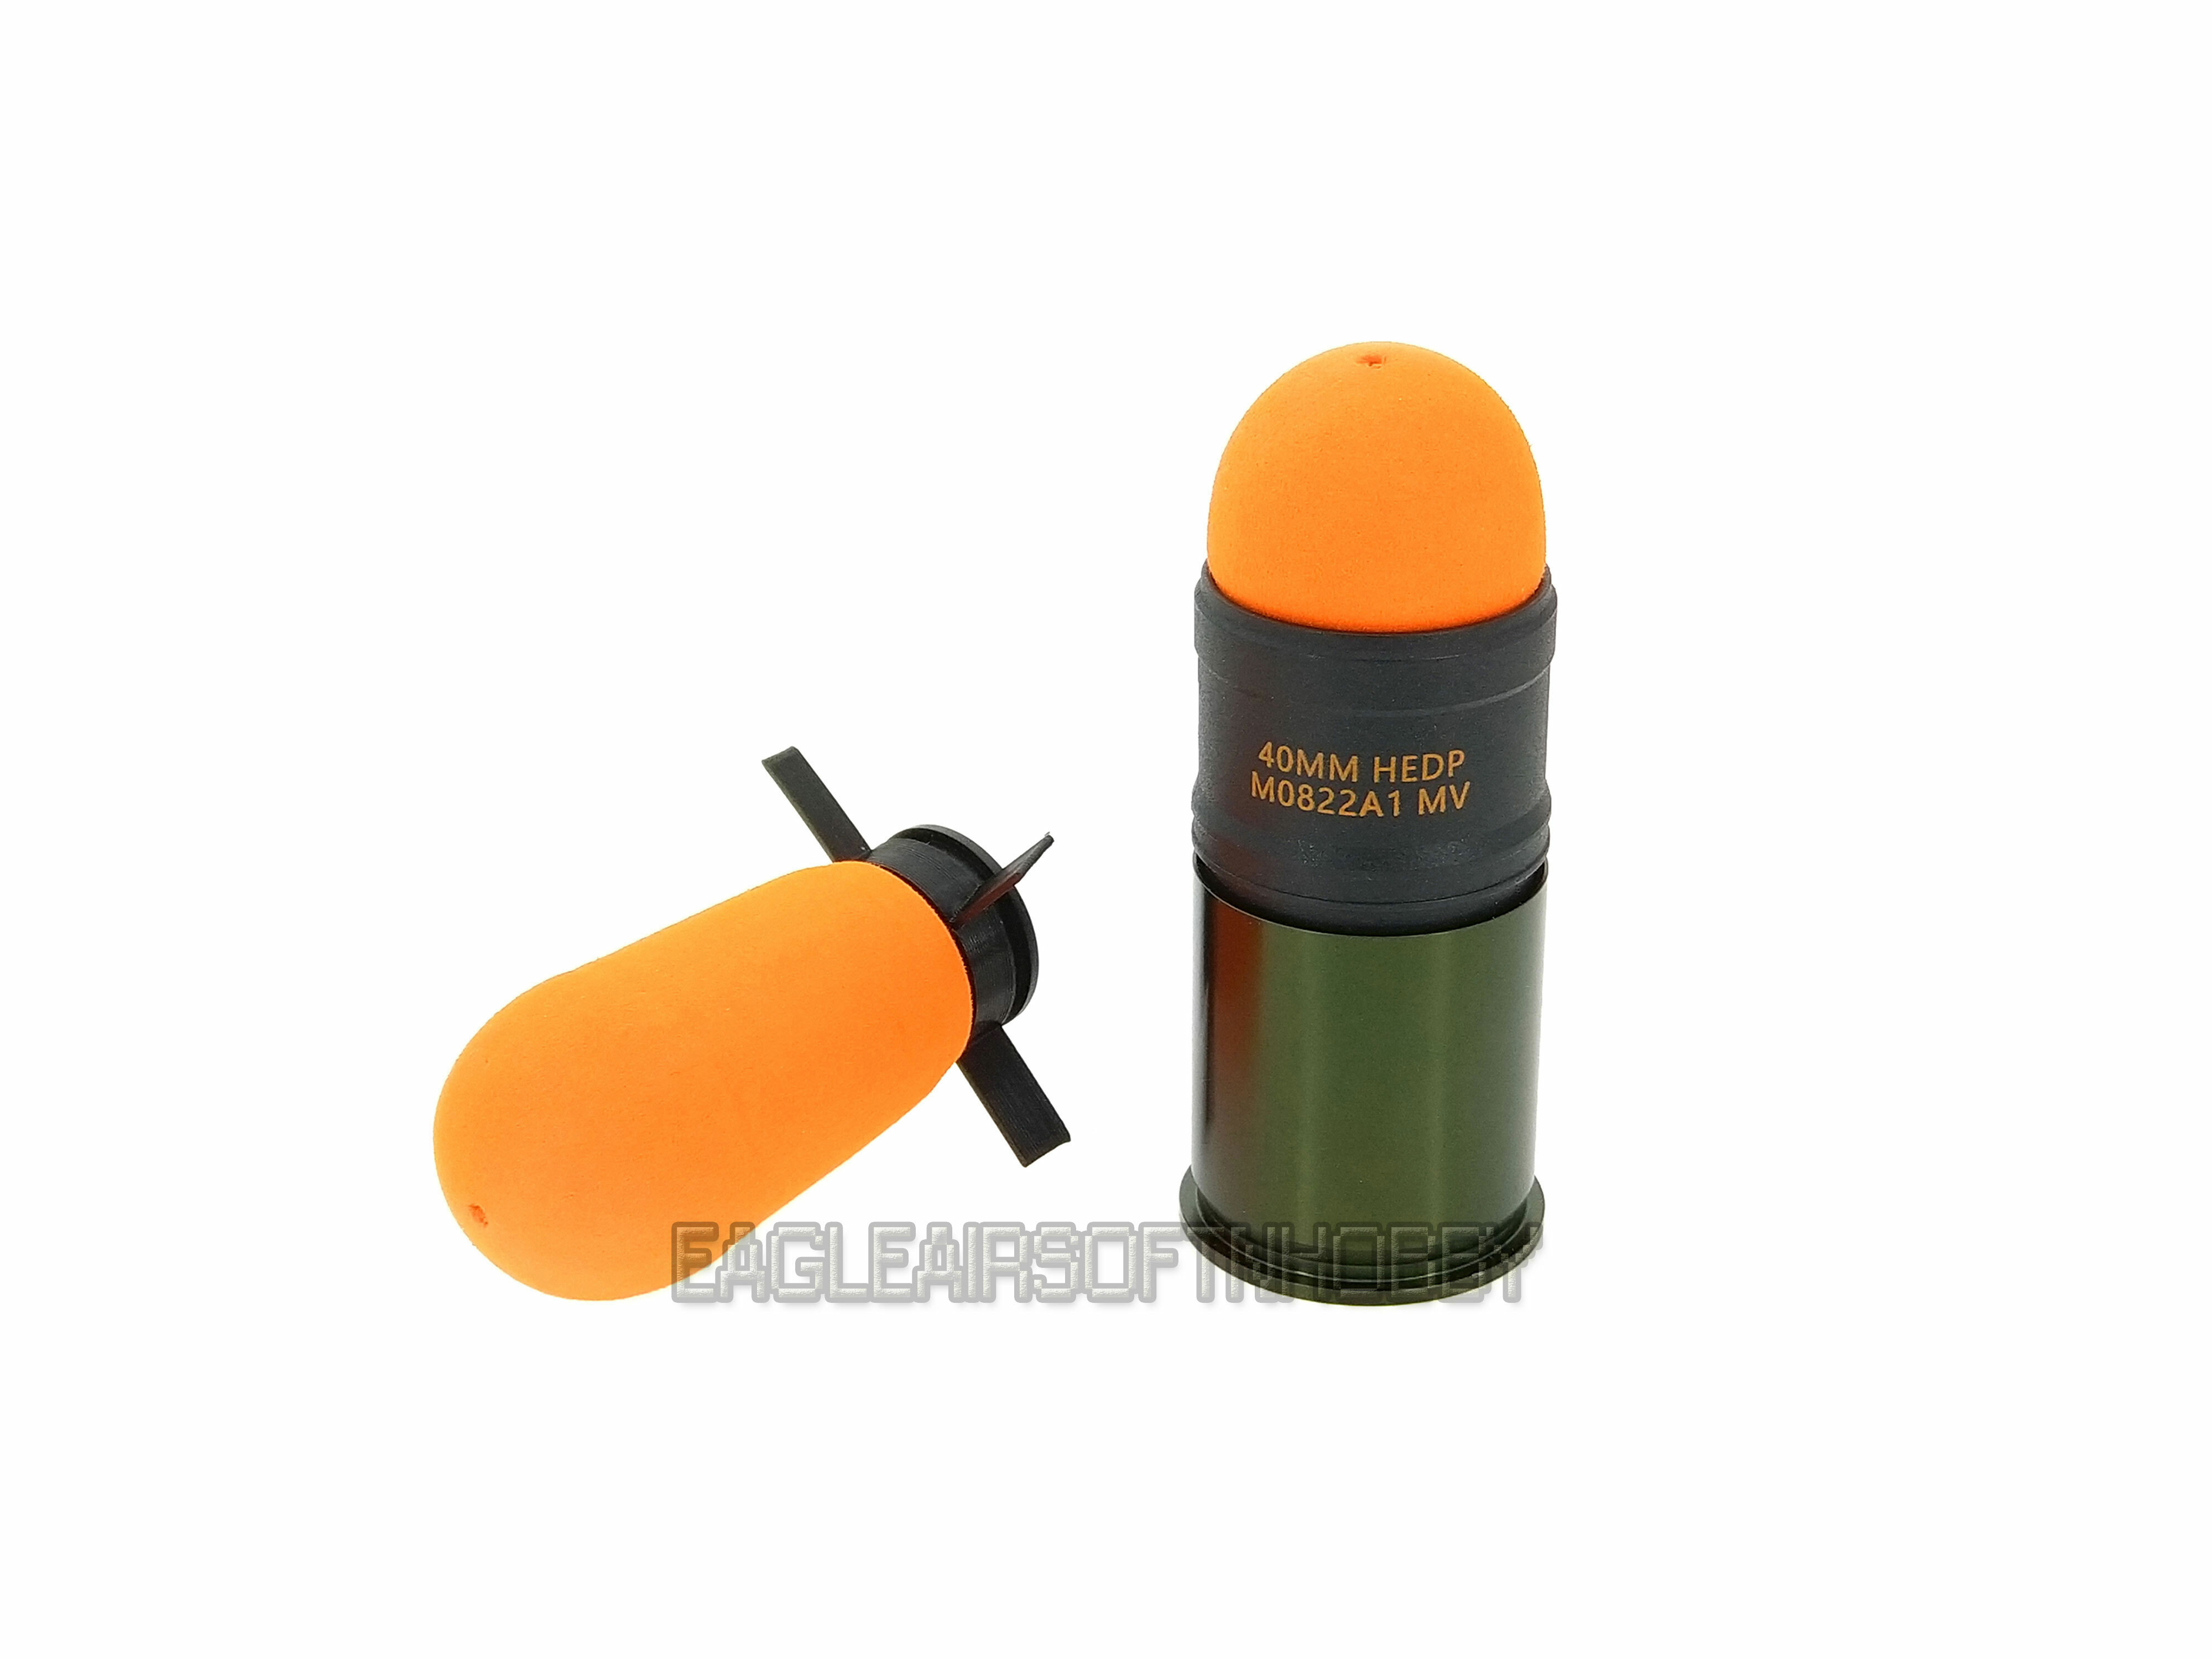 RDW MGL / M32 Foam Airsoft 40mm Spring Powered Grenade.